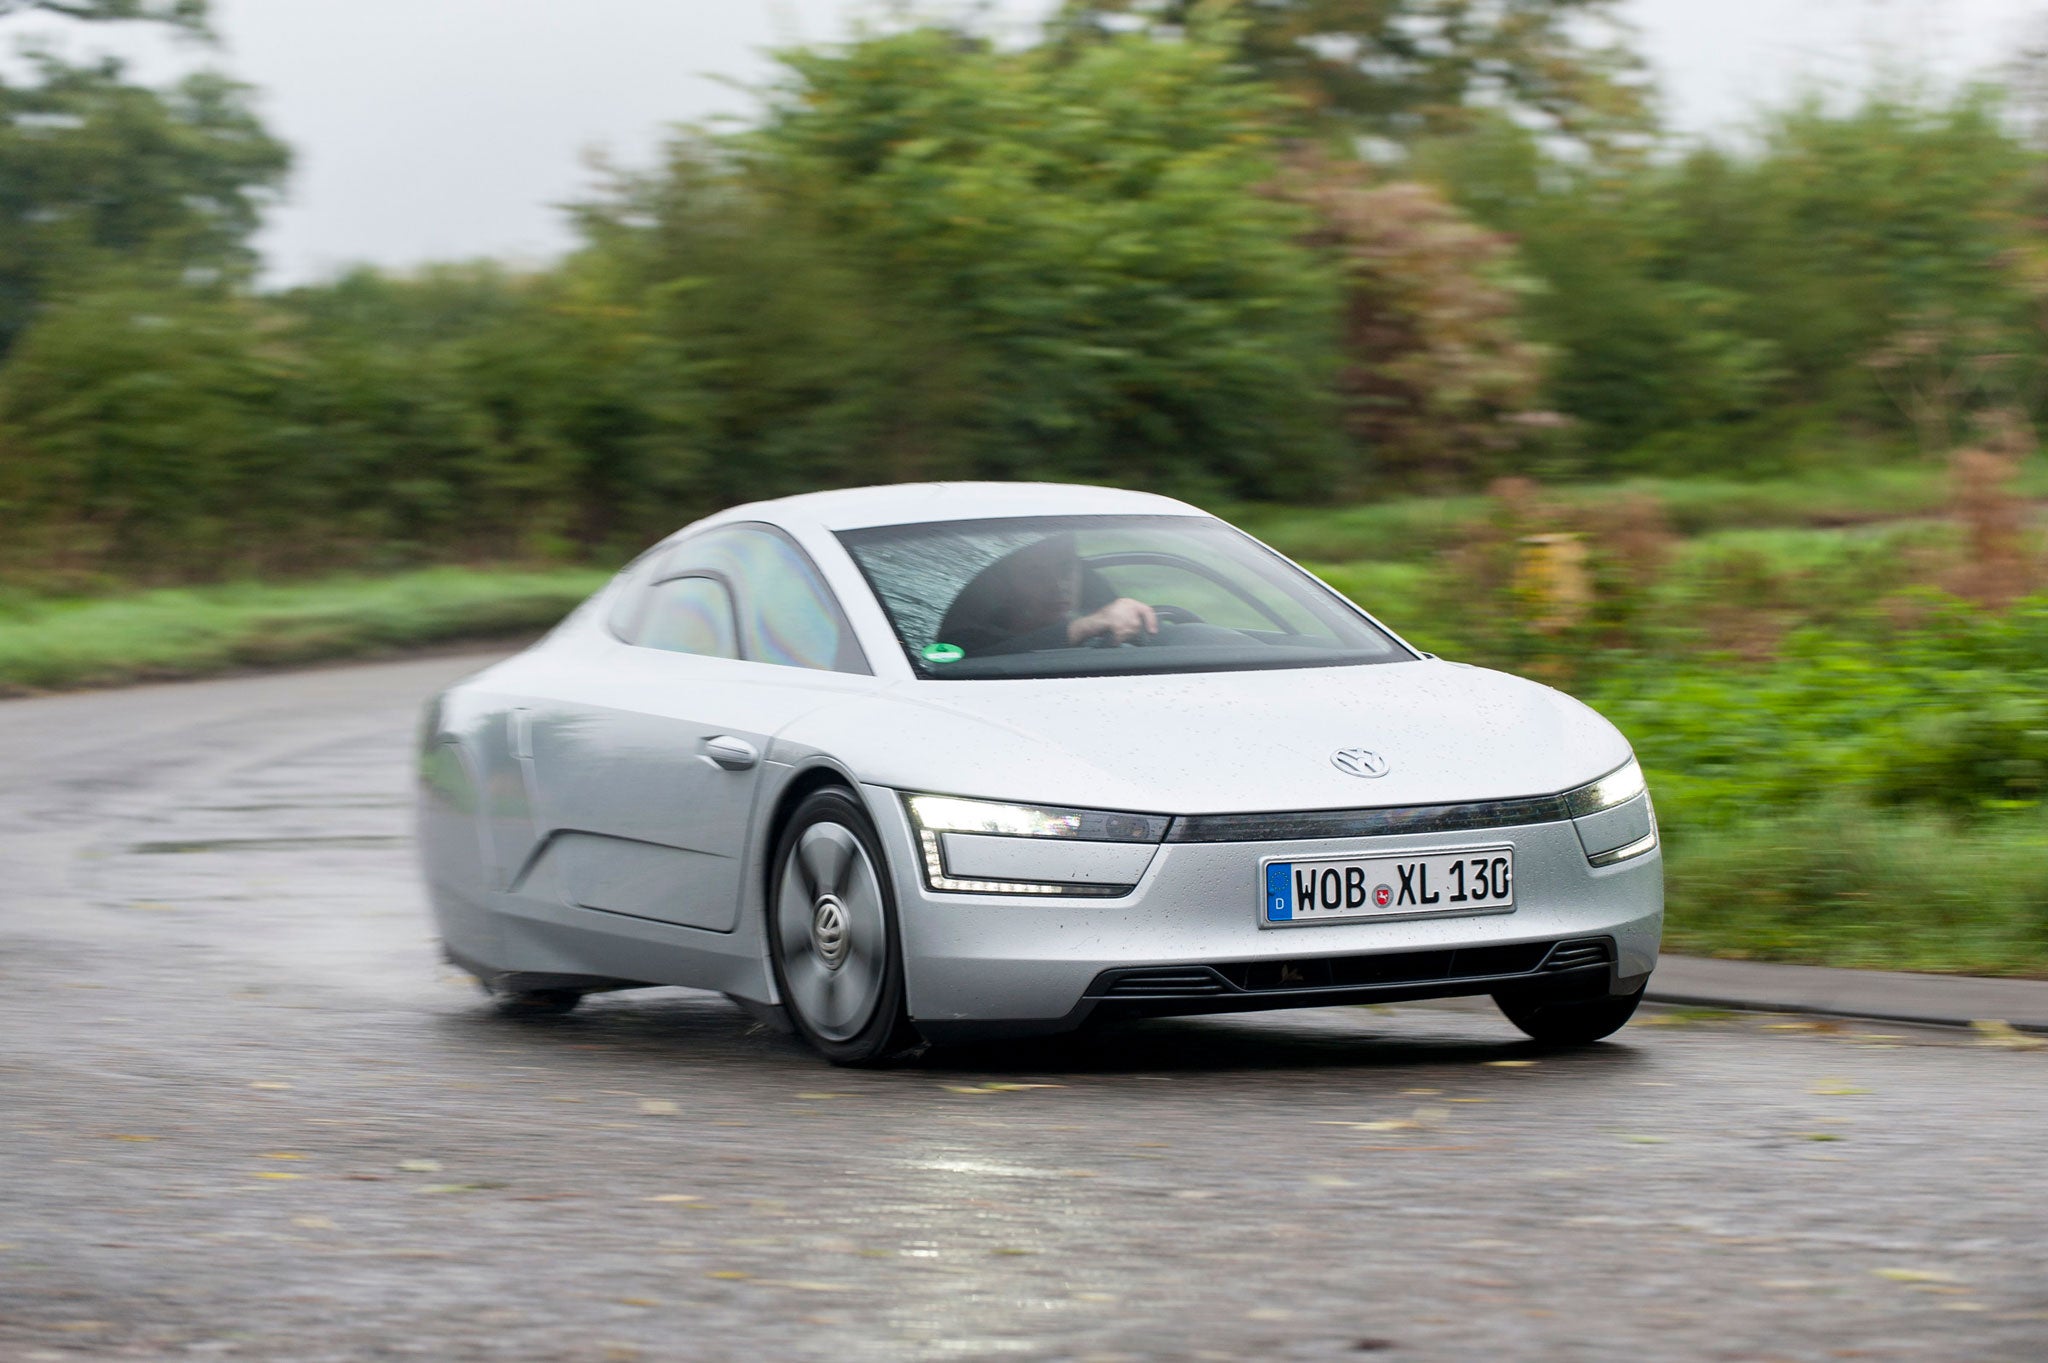 The VW XL1 is the most economical car there has ever been, despite a 99mph top speed and an ability to nudge 62mph in 12.7 seconds